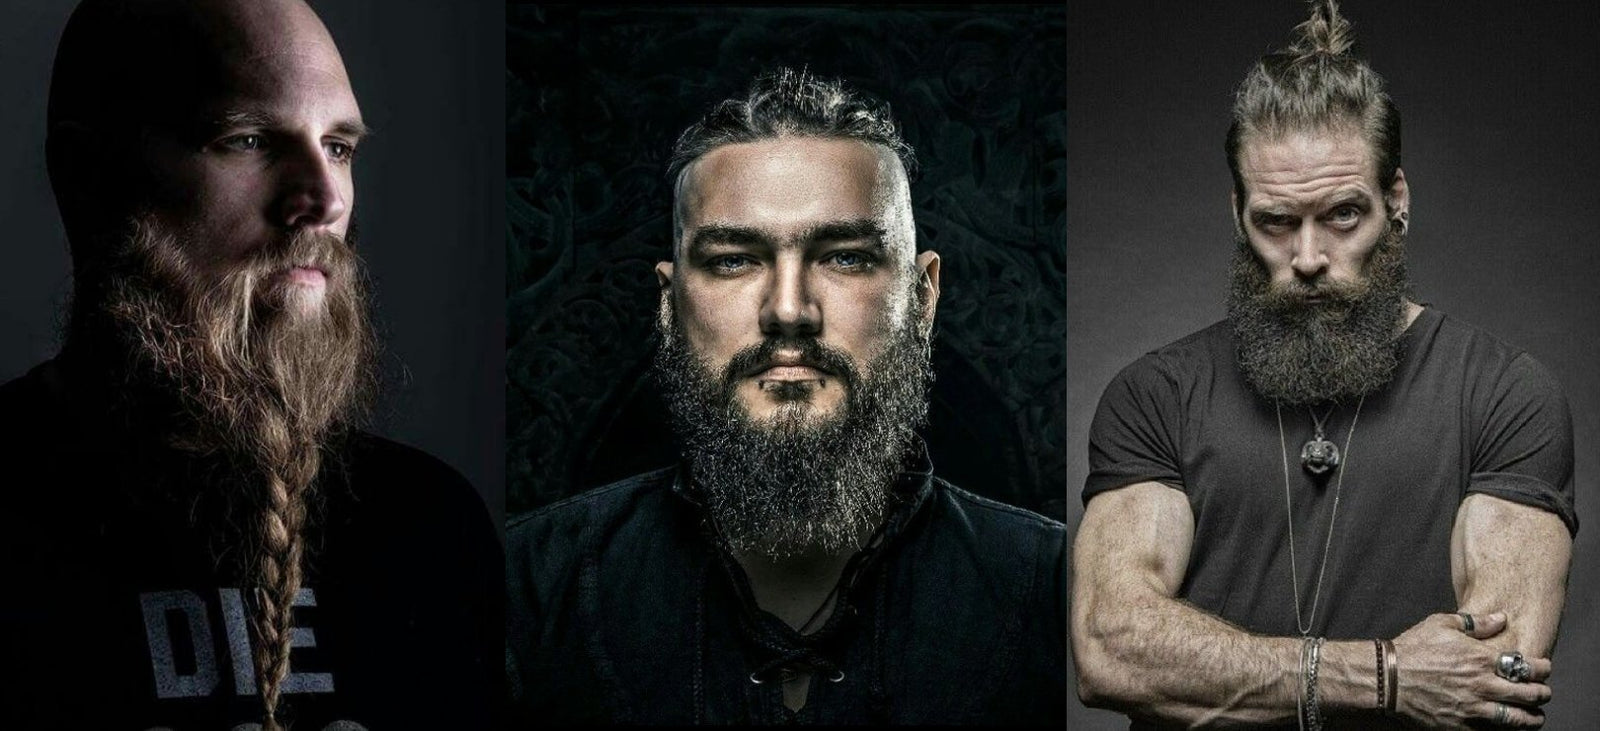 Viking Beard : How to grow and style your own [Ultimate Guide] - vkngjewelry